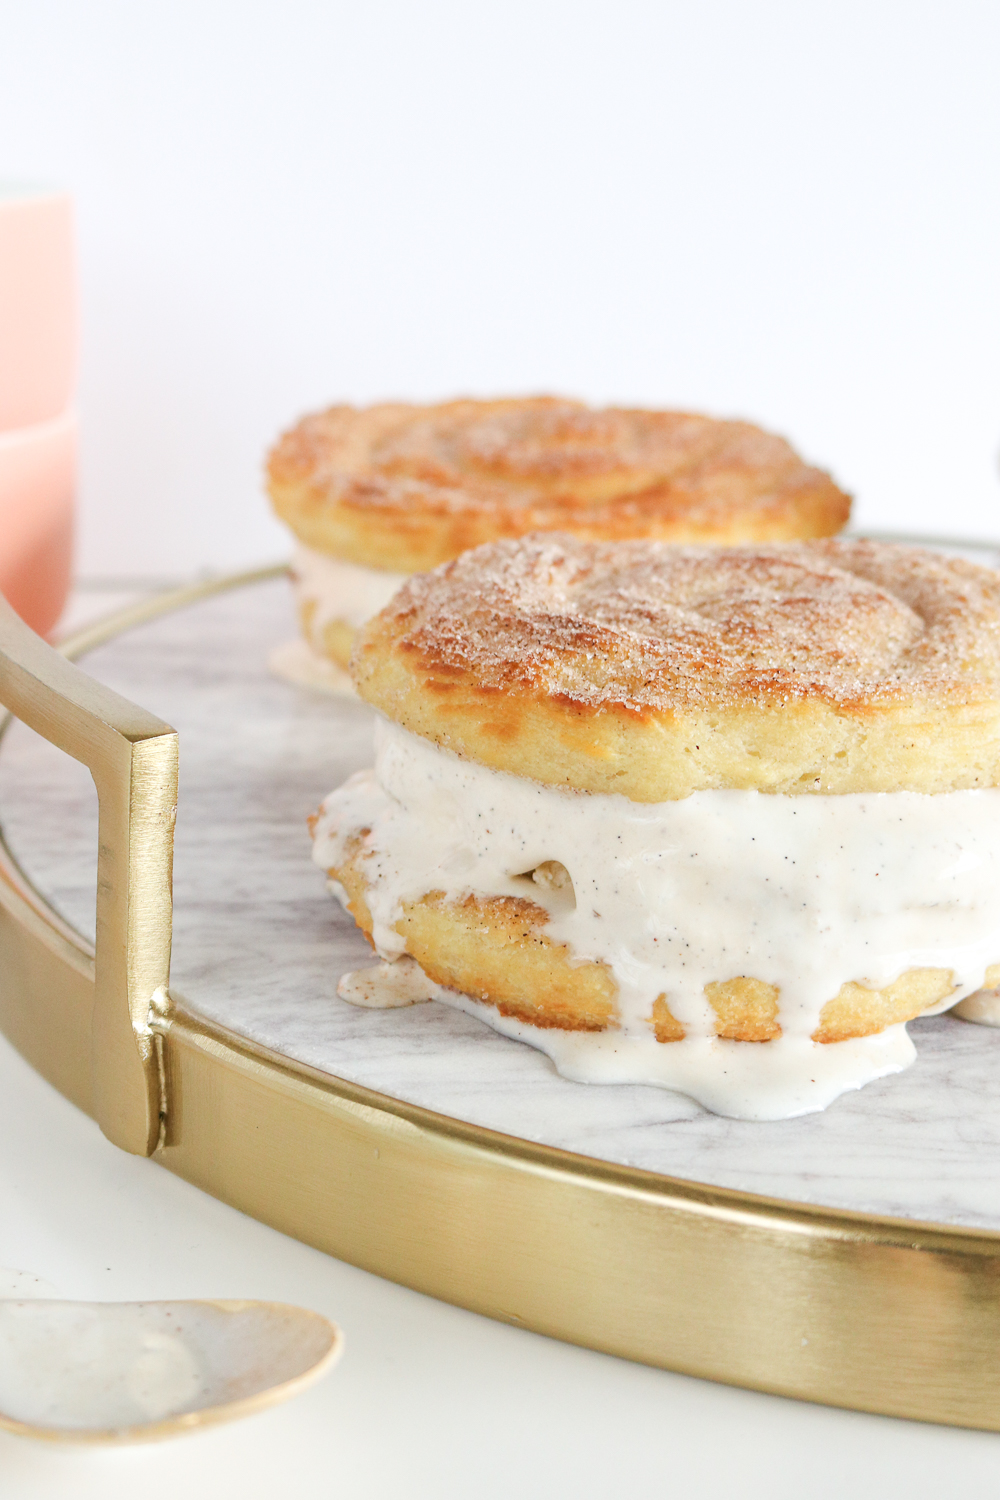 Baked Churro Ice Cream Sandwiches | Club Crafted